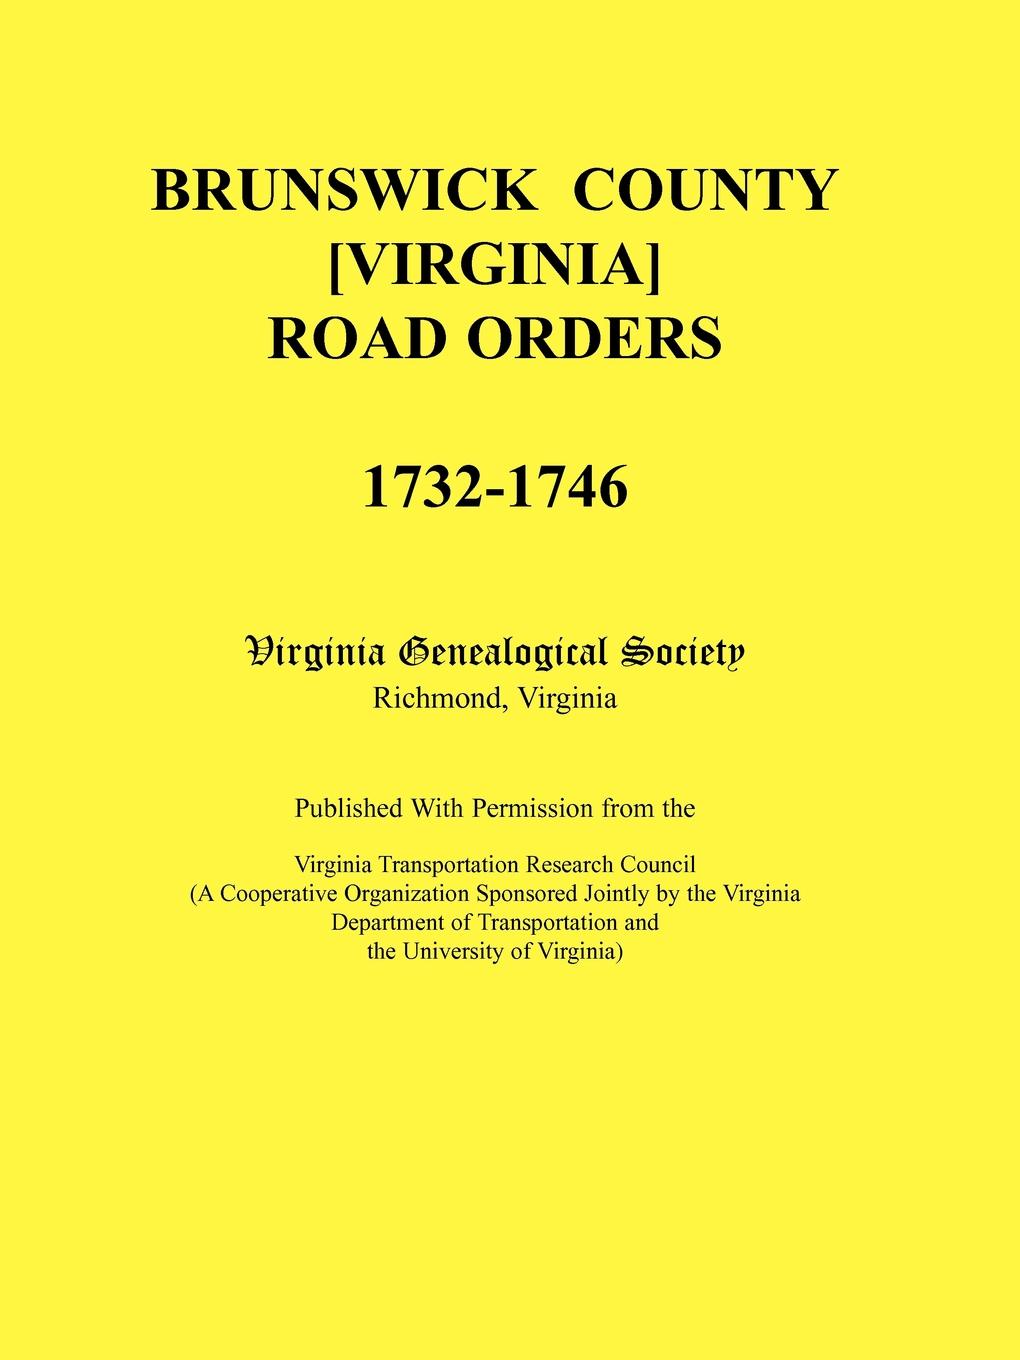 Brunswick County .Virginia. Road Orders, 1732-1746. Published With Permission from the Virginia Transportation Research Council (A Cooperative Organization Sponsored Jointly by the Virginia Department of Transportation and the University of Virginia